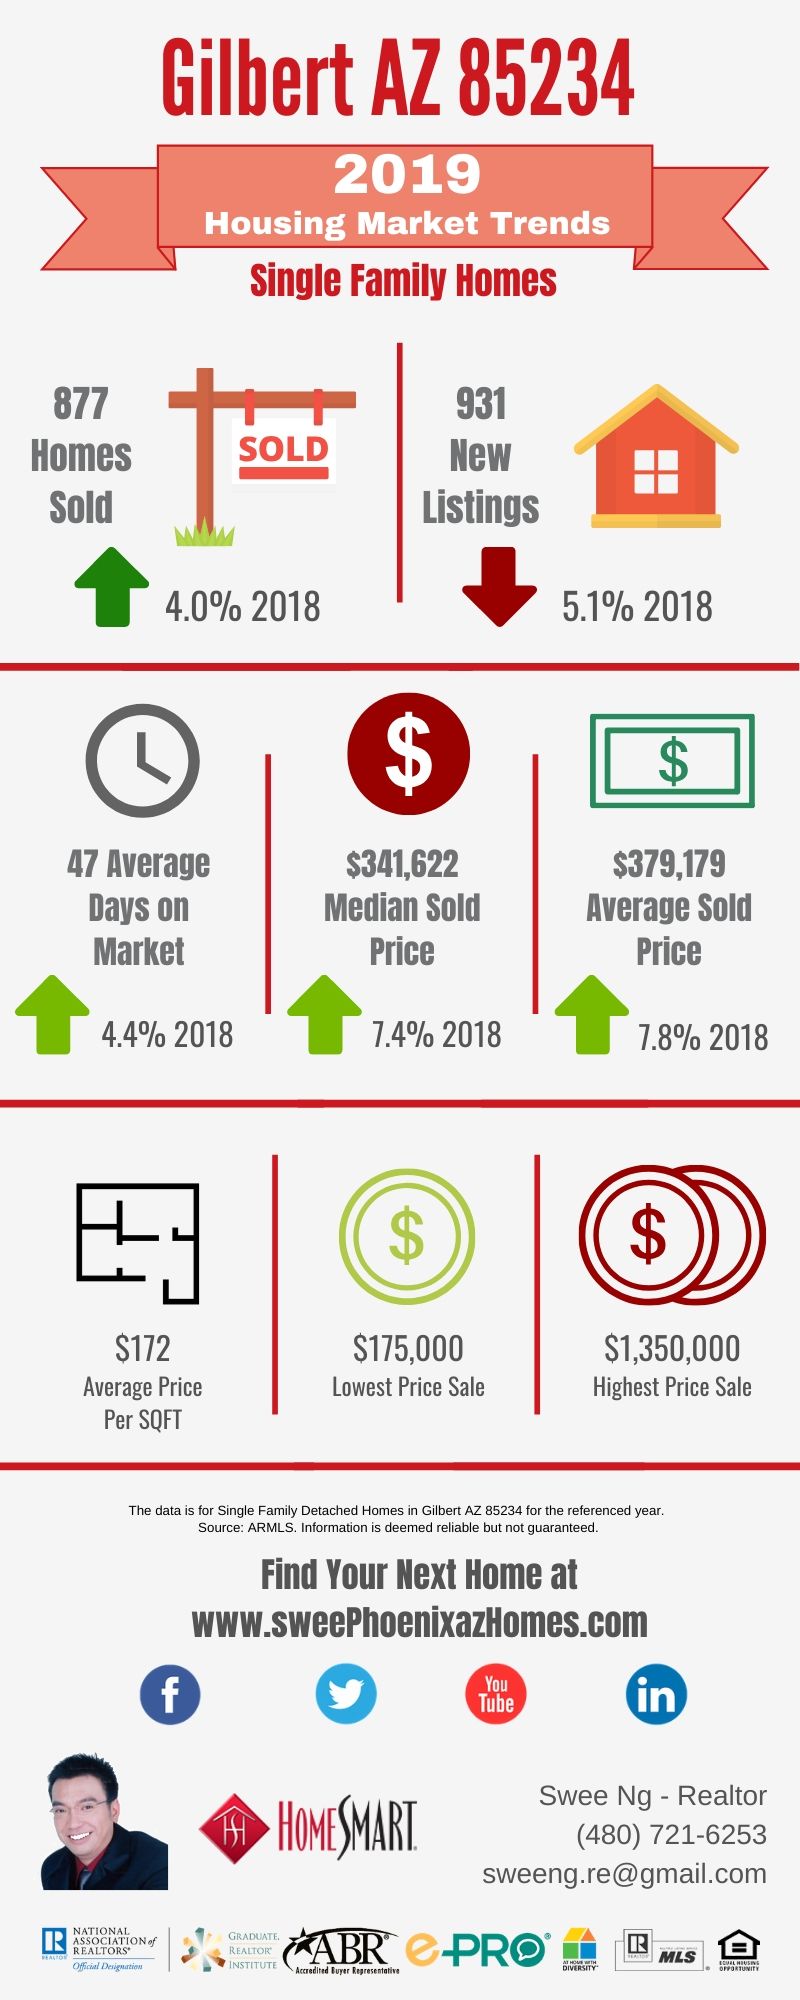 Gilbert AZ 85234 Housing Market Trends Report 2019 by Swee Ng, Real Estate and House Value